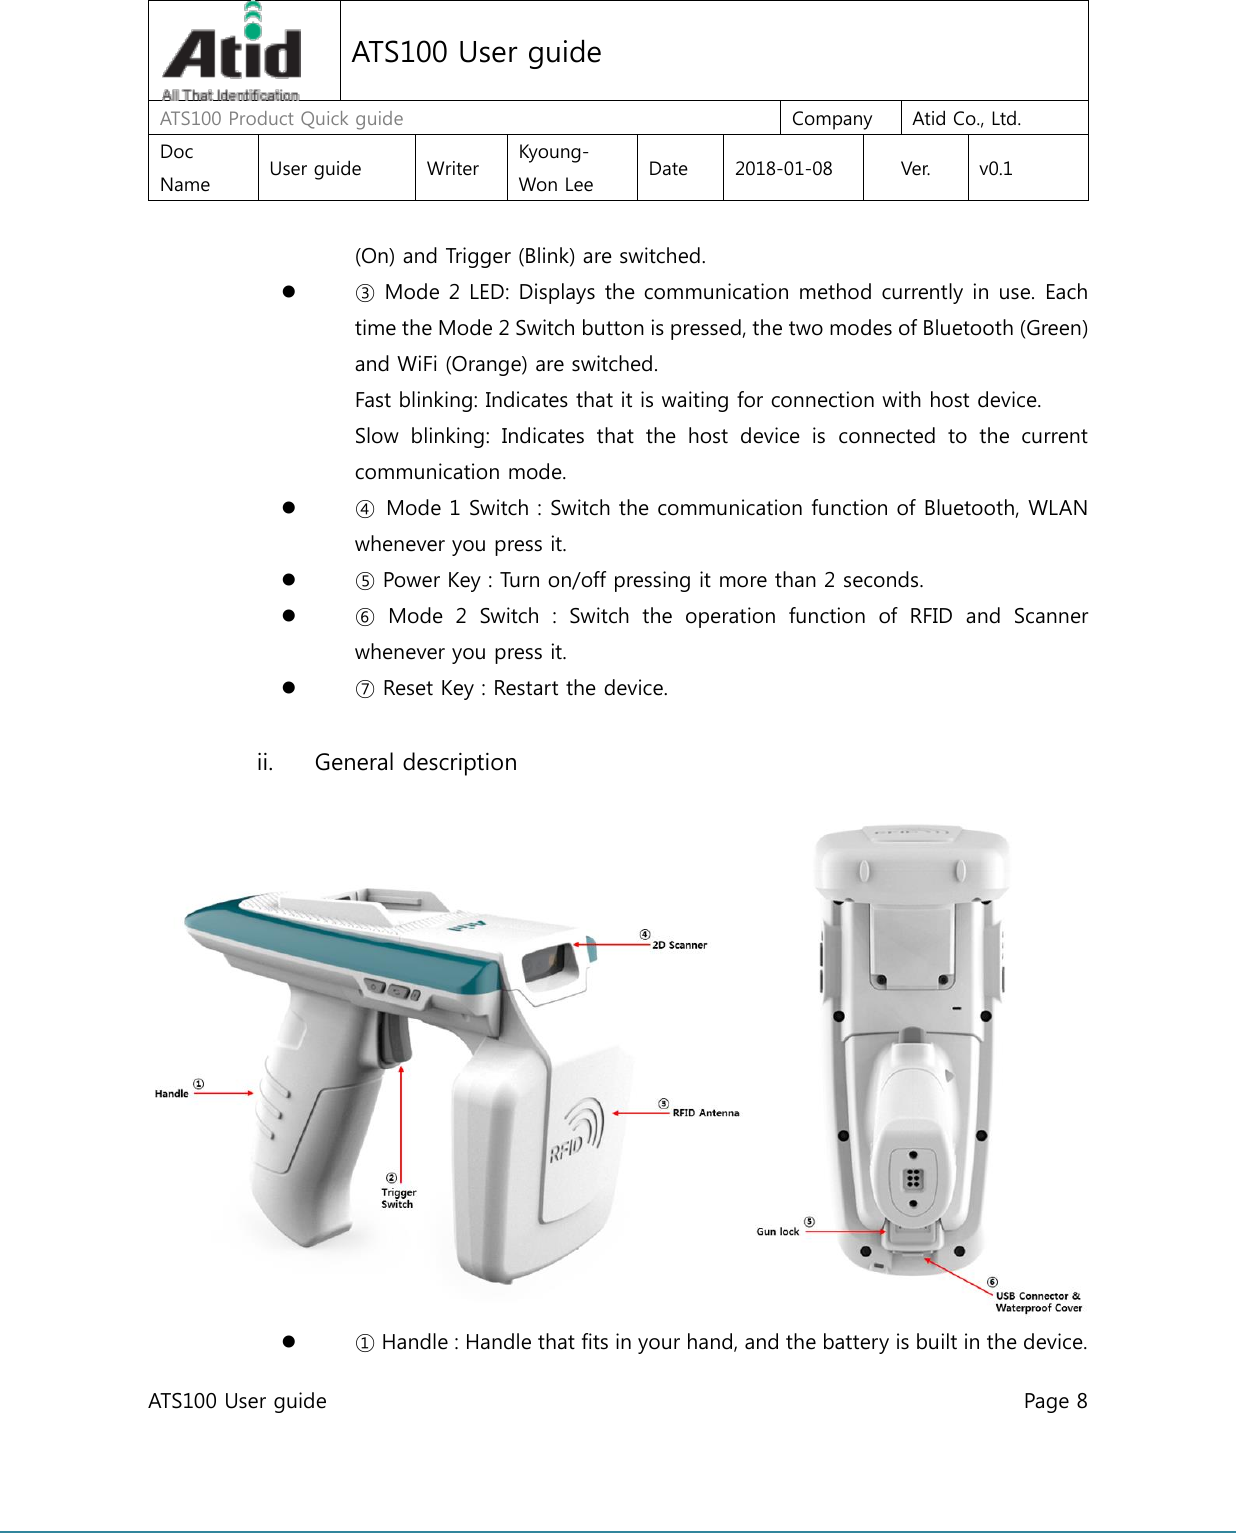  ATS100 User guide    Page 8      ATS100 User guide ATS100 Product Quick guide  Company  Atid Co., Ltd. Doc Name  User guide  Writer  Kyoung-Won Lee  Date  2018-01-08  Ver.  v0.1 (On) and Trigger (Blink) are switched.  ③ Mode 2 LED: Displays the communication method currently in use. Each time the Mode 2 Switch button is pressed, the two modes of Bluetooth (Green) and WiFi (Orange) are switched. Fast blinking: Indicates that it is waiting for connection with host device. Slow  blinking:  Indicates  that  the  host  device  is  connected  to  the  current communication mode.  ④  Mode 1 Switch : Switch the communication function of Bluetooth, WLAN whenever you press it.  ⑤ Power Key : Turn on/off pressing it more than 2 seconds.  ⑥  Mode  2  Switch  :  Switch  the  operation  function  of  RFID  and  Scanner whenever you press it.  ⑦ Reset Key : Restart the device.  ii. General description        ① Handle : Handle that fits in your hand, and the battery is built in the device. 